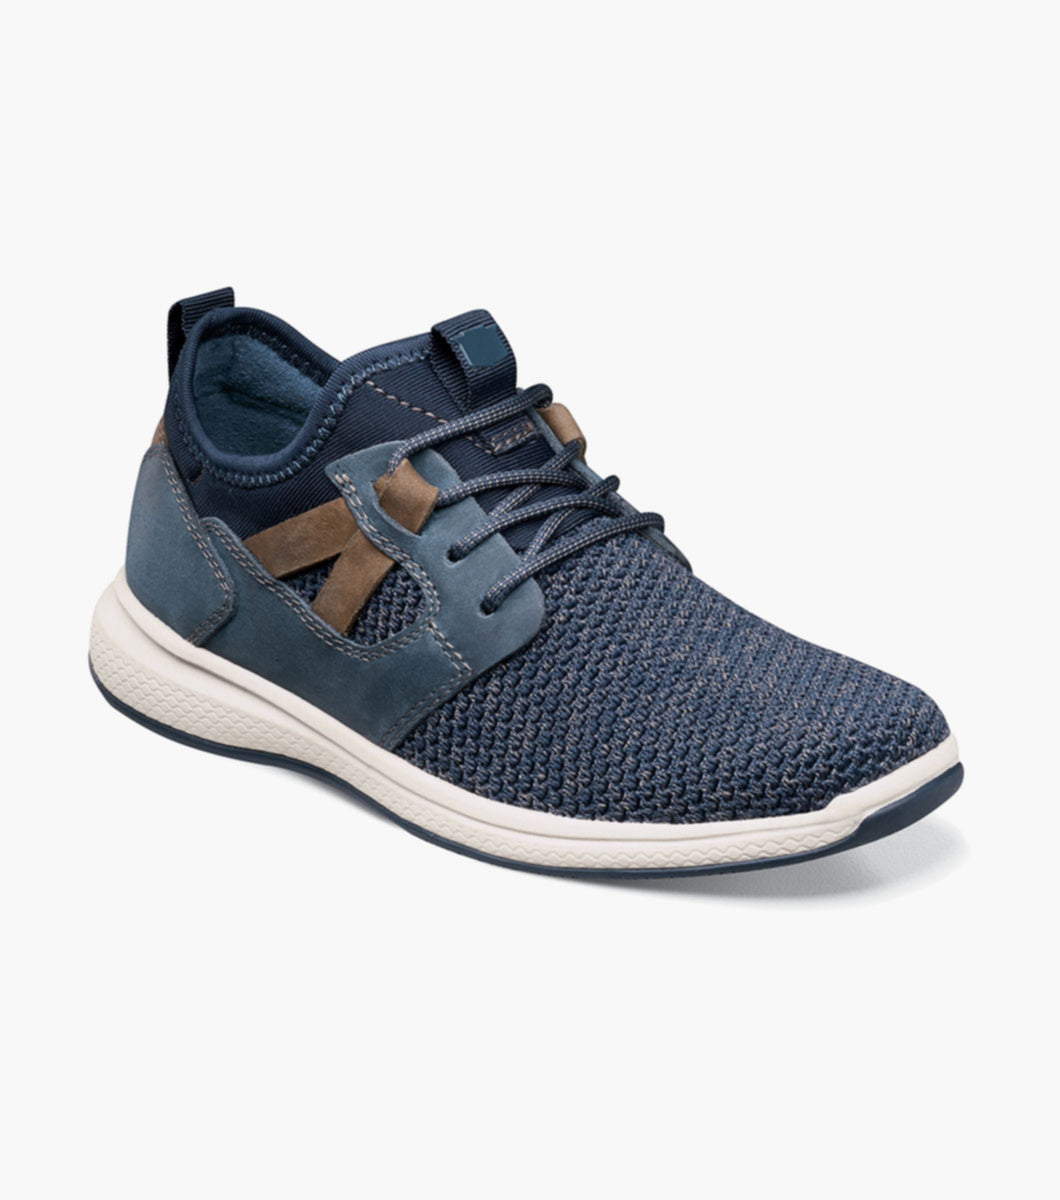 Step into a new world of style and comfort with the Florsheim Great Lakes Knit Plain Toe Sneaker, Jr. Featuring a hybrid sneaker design with an athletic-inspired sole, this is a shoe style he needs in his closet.